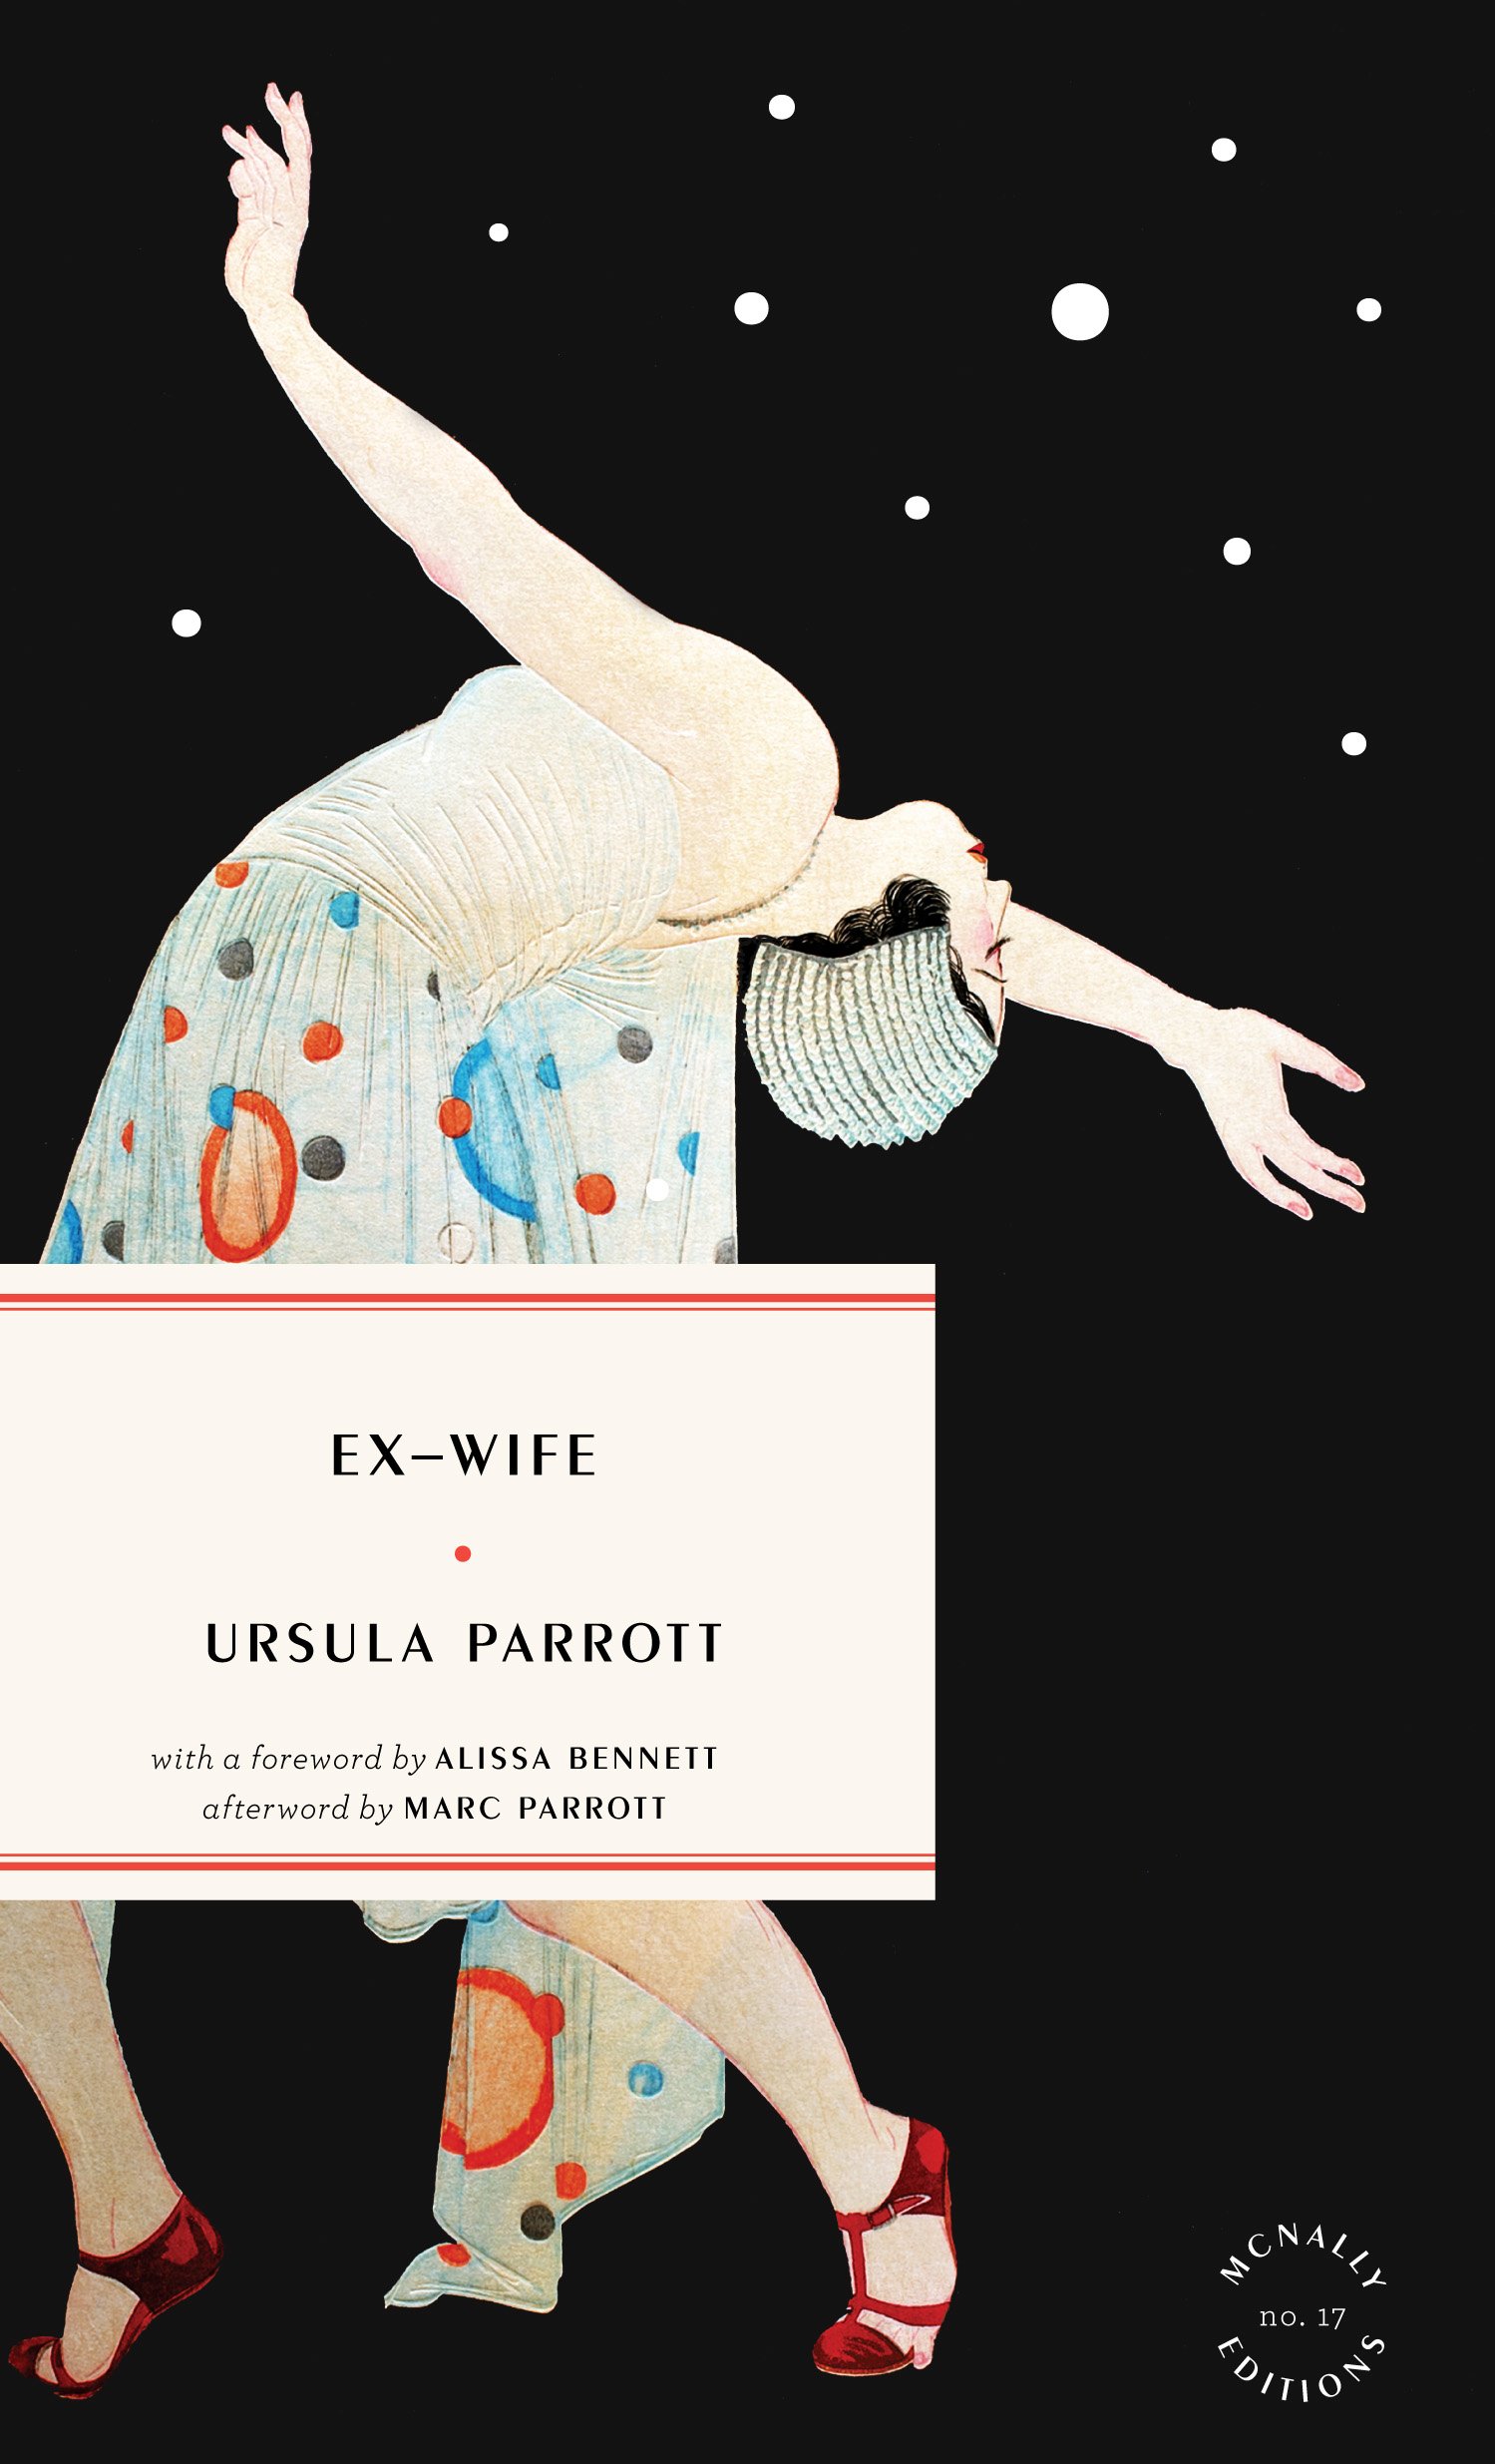 Ex-Wife by Ursula Parrott — McNALLY EDITIONS